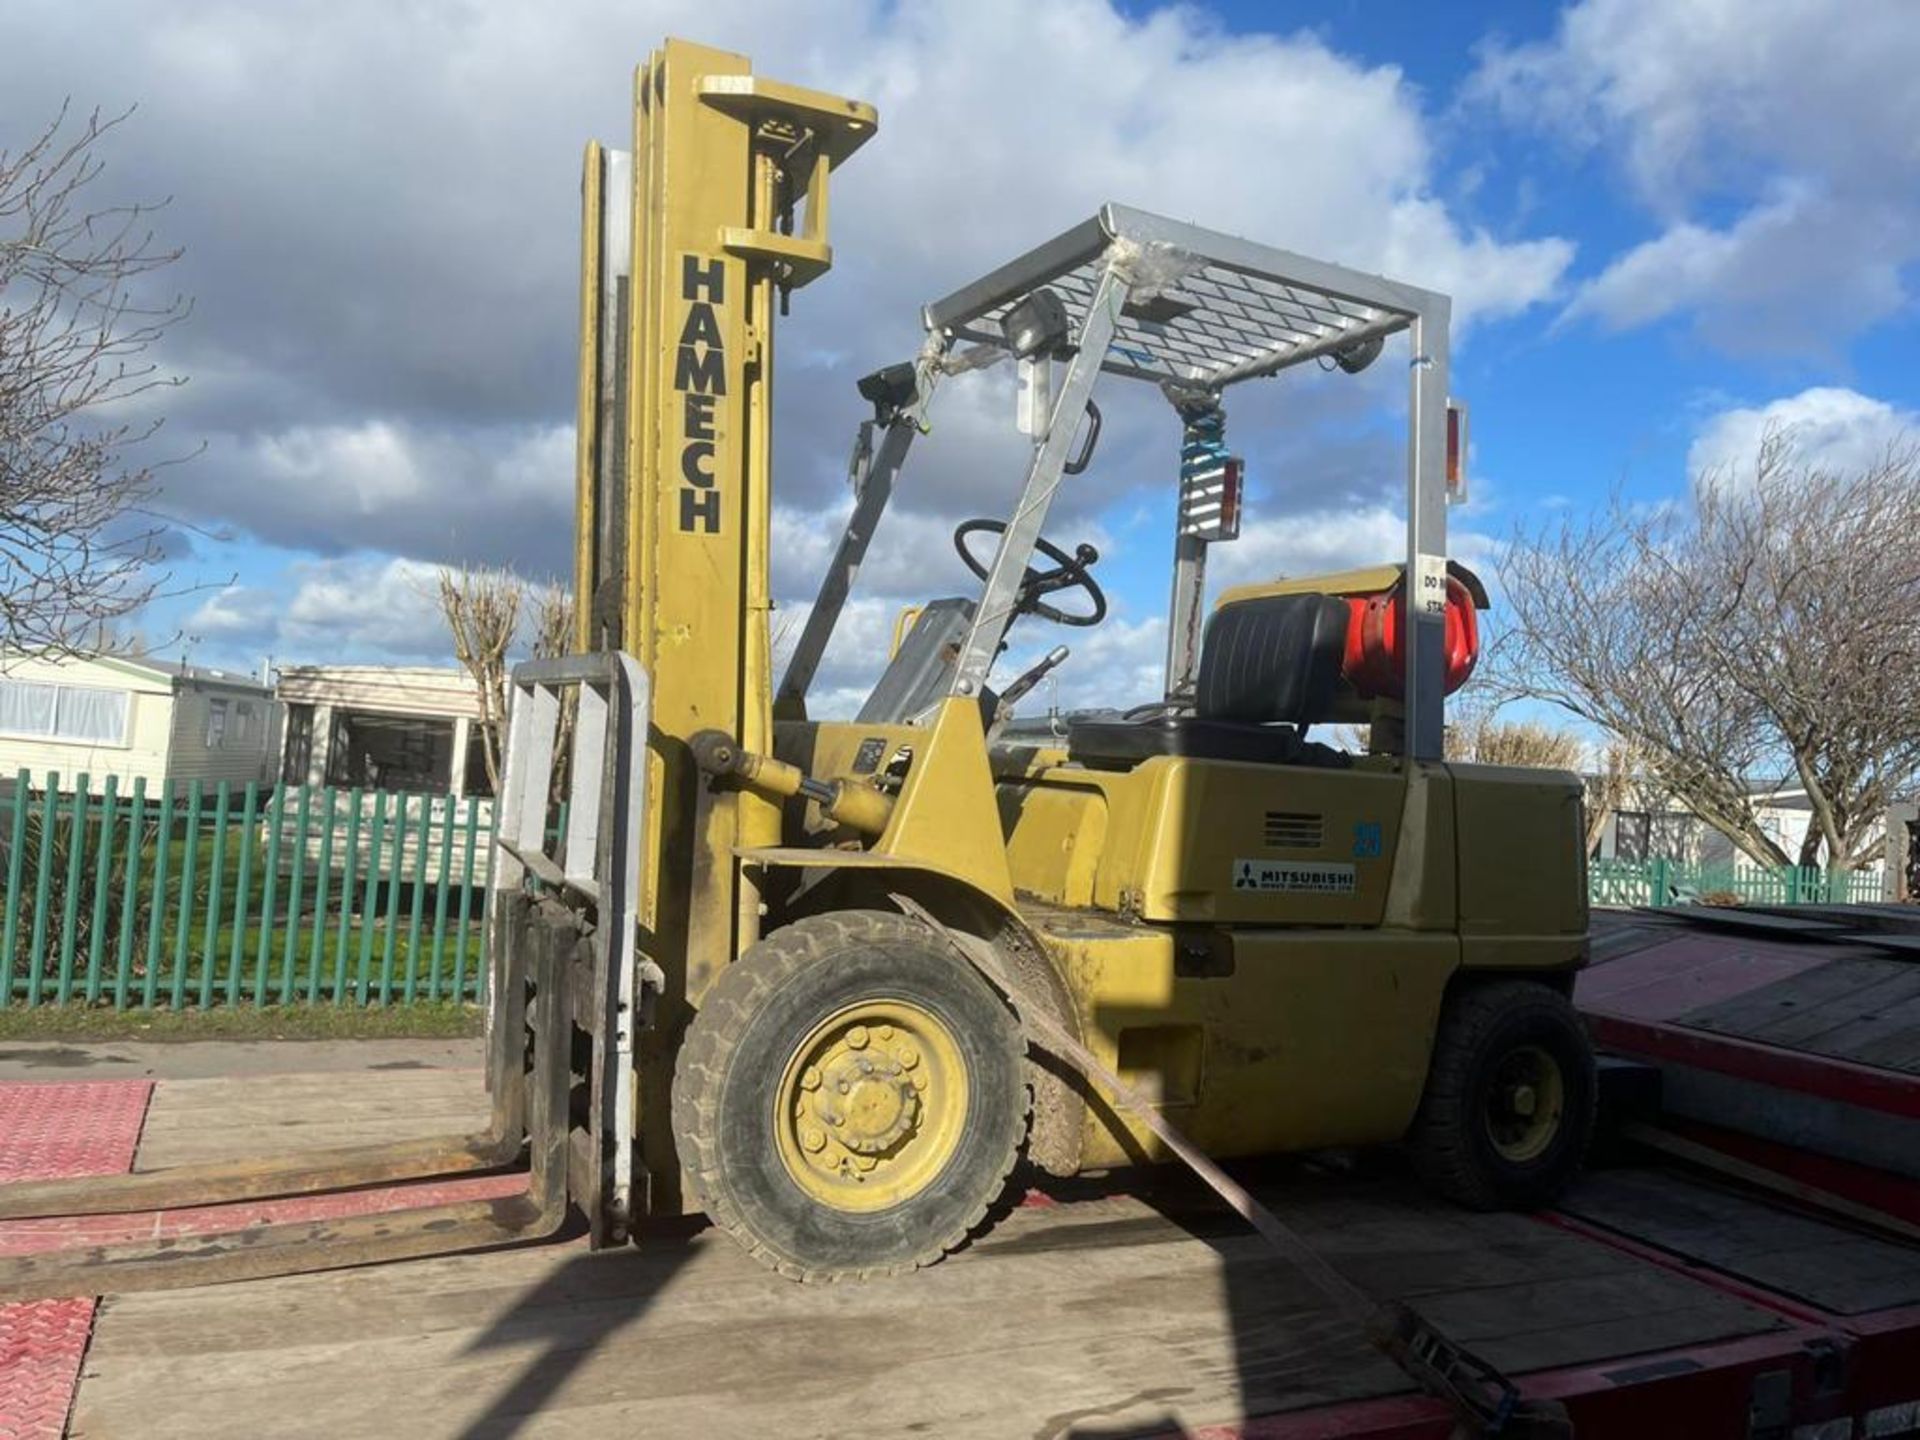 MITSUBISHI 2.5TON FORKLIFT - GAS LPG - 1988 - APPROX : 2000 HRS - FULLY WORKING ORDER